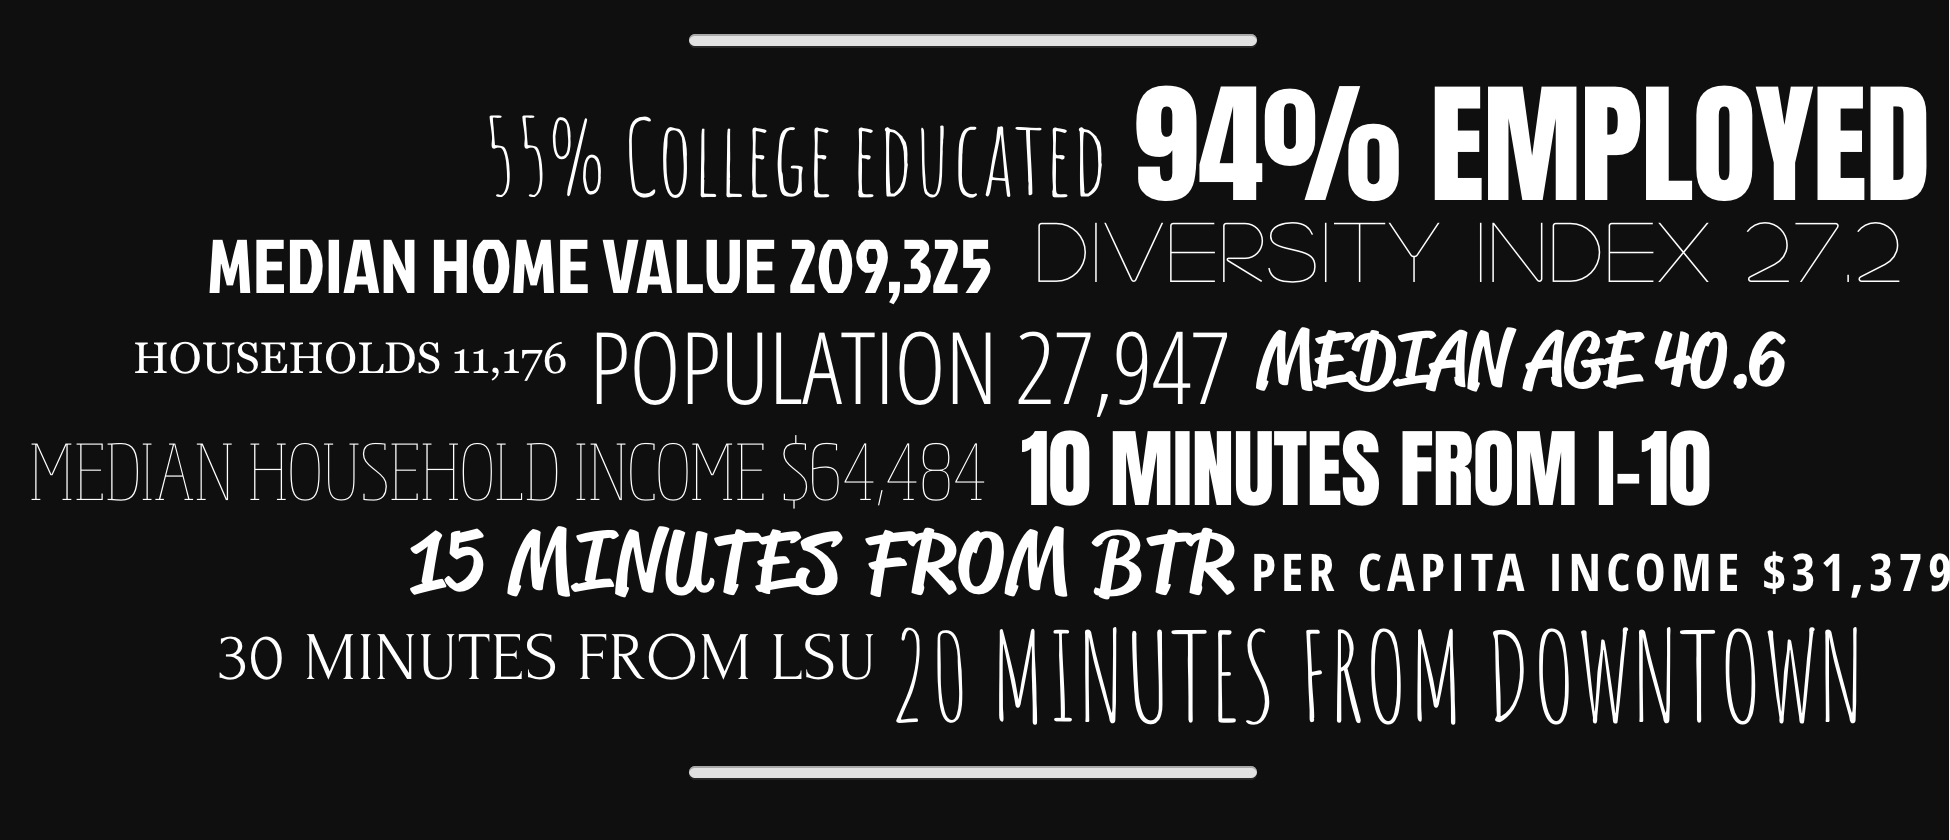  Discover More Marketing Guide & Facts 10 MINUTES FROM I-10 15 MINUTES FROM BTR 20 MINUTES FROM DOWNTOWN 30 MINUTES FROM LSU POPULATION 27,947 MEDIAN HOUSEHOLD INCOME $64,484 HOUSEHOLDS 11,176 MEDIAN HOME VALUE 209,325 PER CAPITA INCOME $31,379 MEDIAN AGE 40.6 DIVERSITY INDEX 27.2 55% College educated 94% EMPLOYED